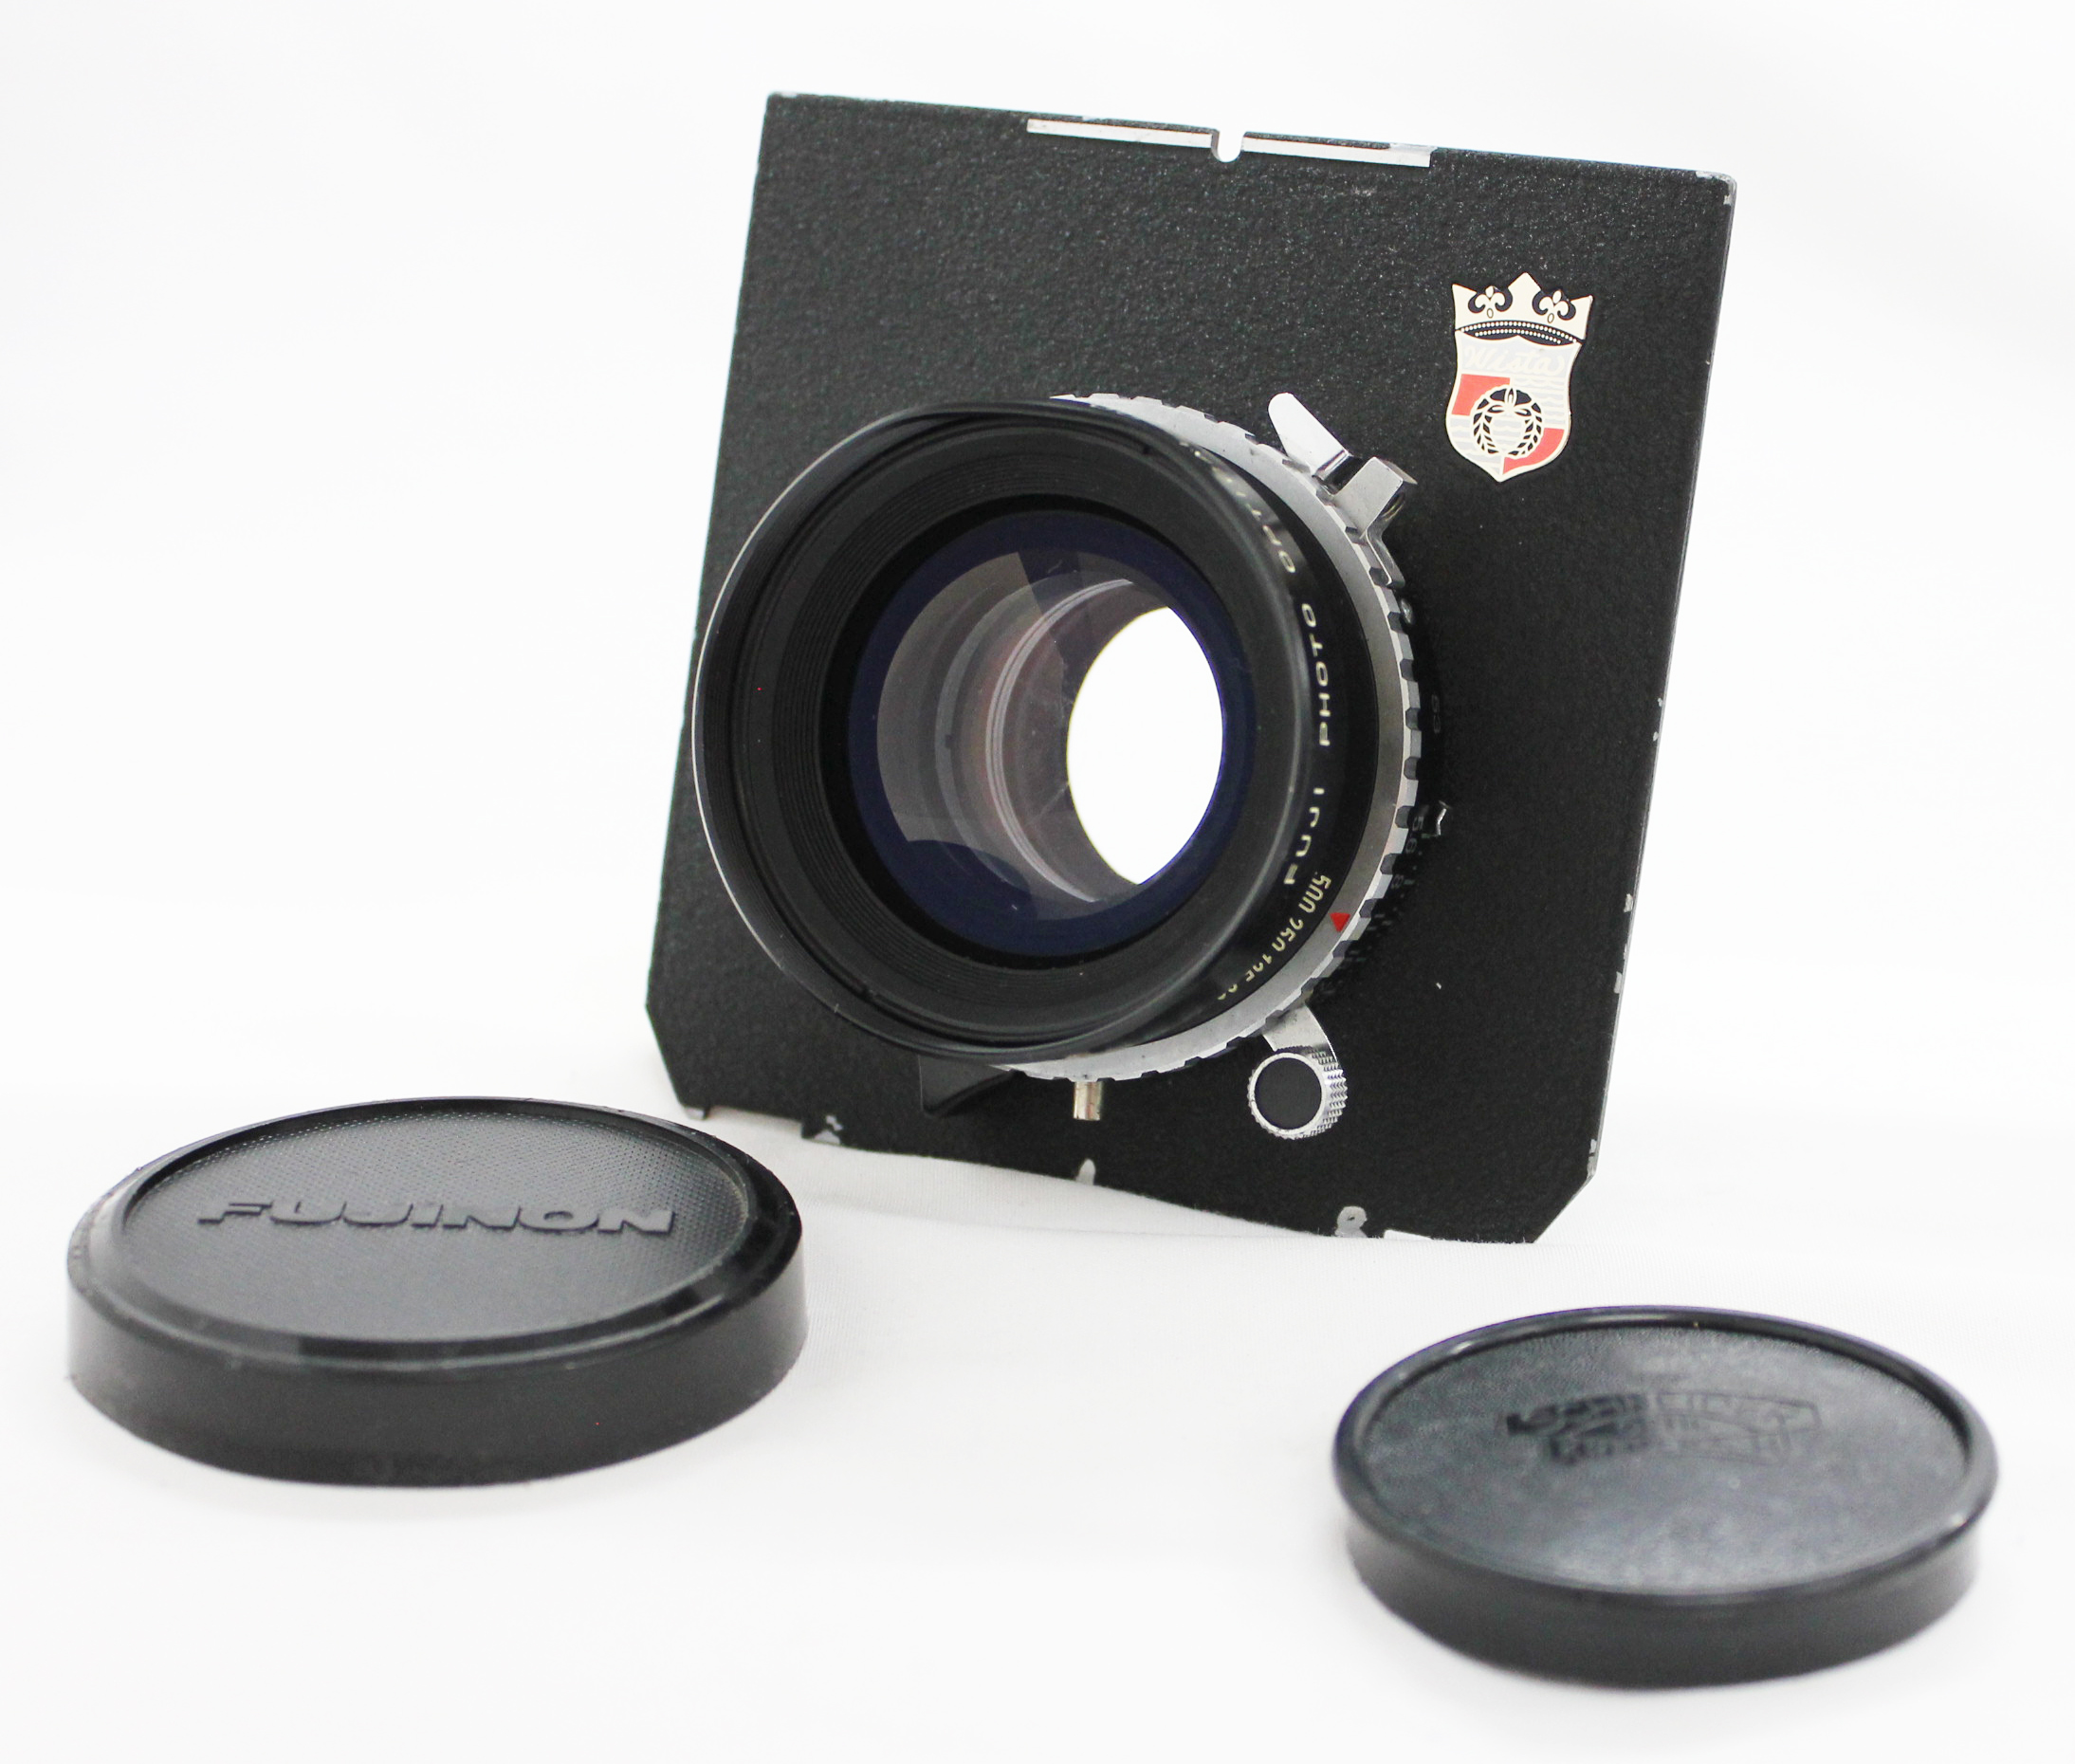 Japan Used Camera Shop | [Excellent+++] Fuji Fujinon W 150mm F/5.6 4x5 Large Format Lens with Copal Shutter from Japan